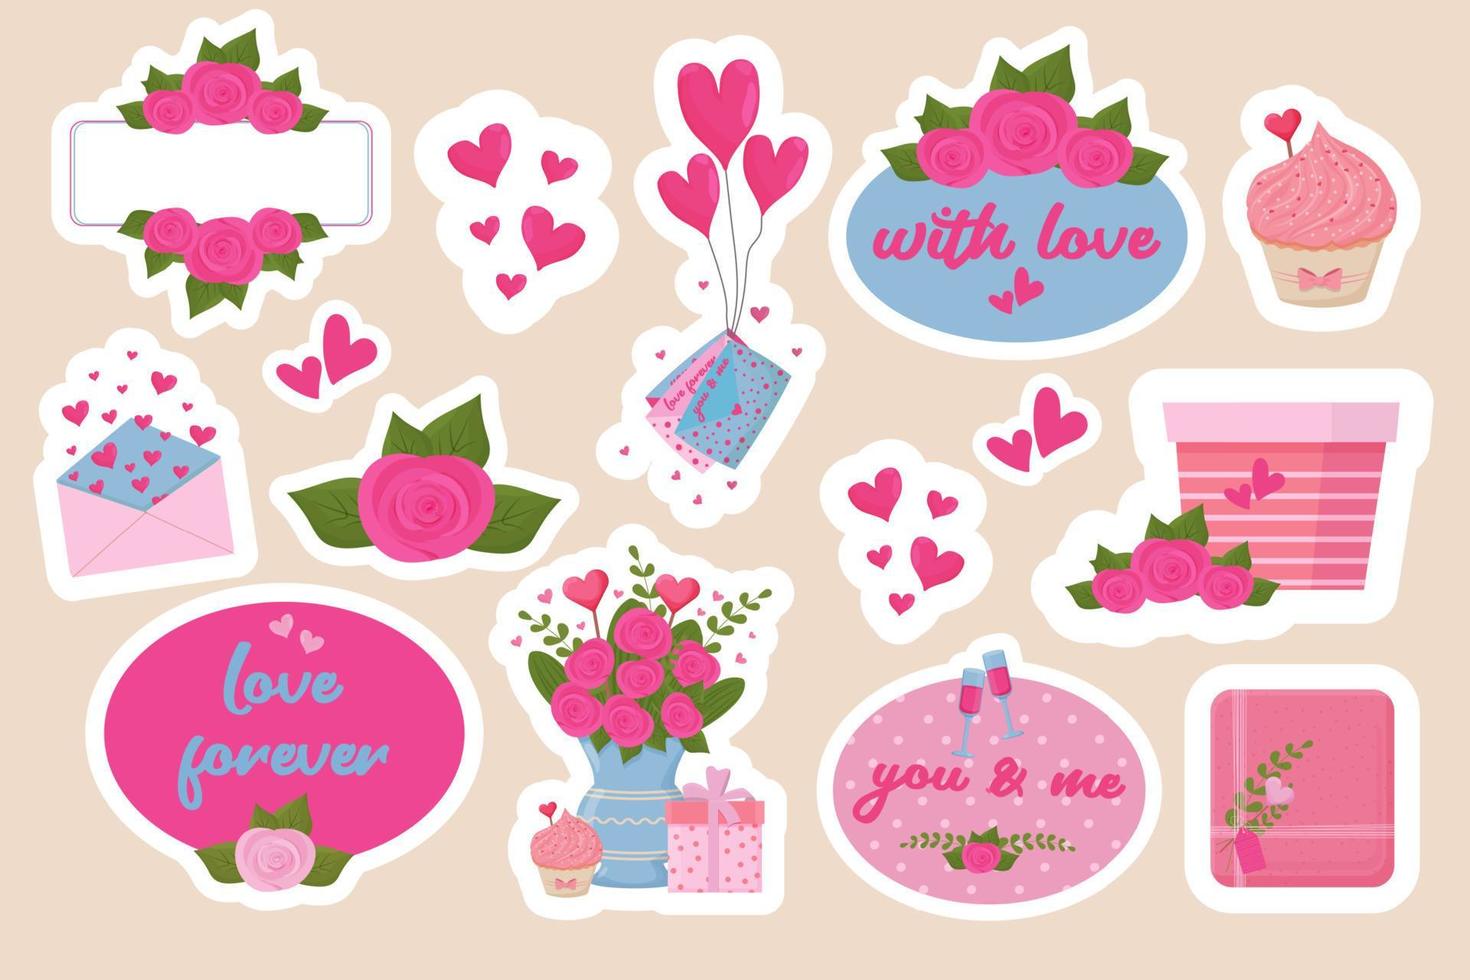 Romantic stickers set with frames, pink roses, gifts, love letter and cupcake in cute cartoon style isolated on white background. . Vector illustration